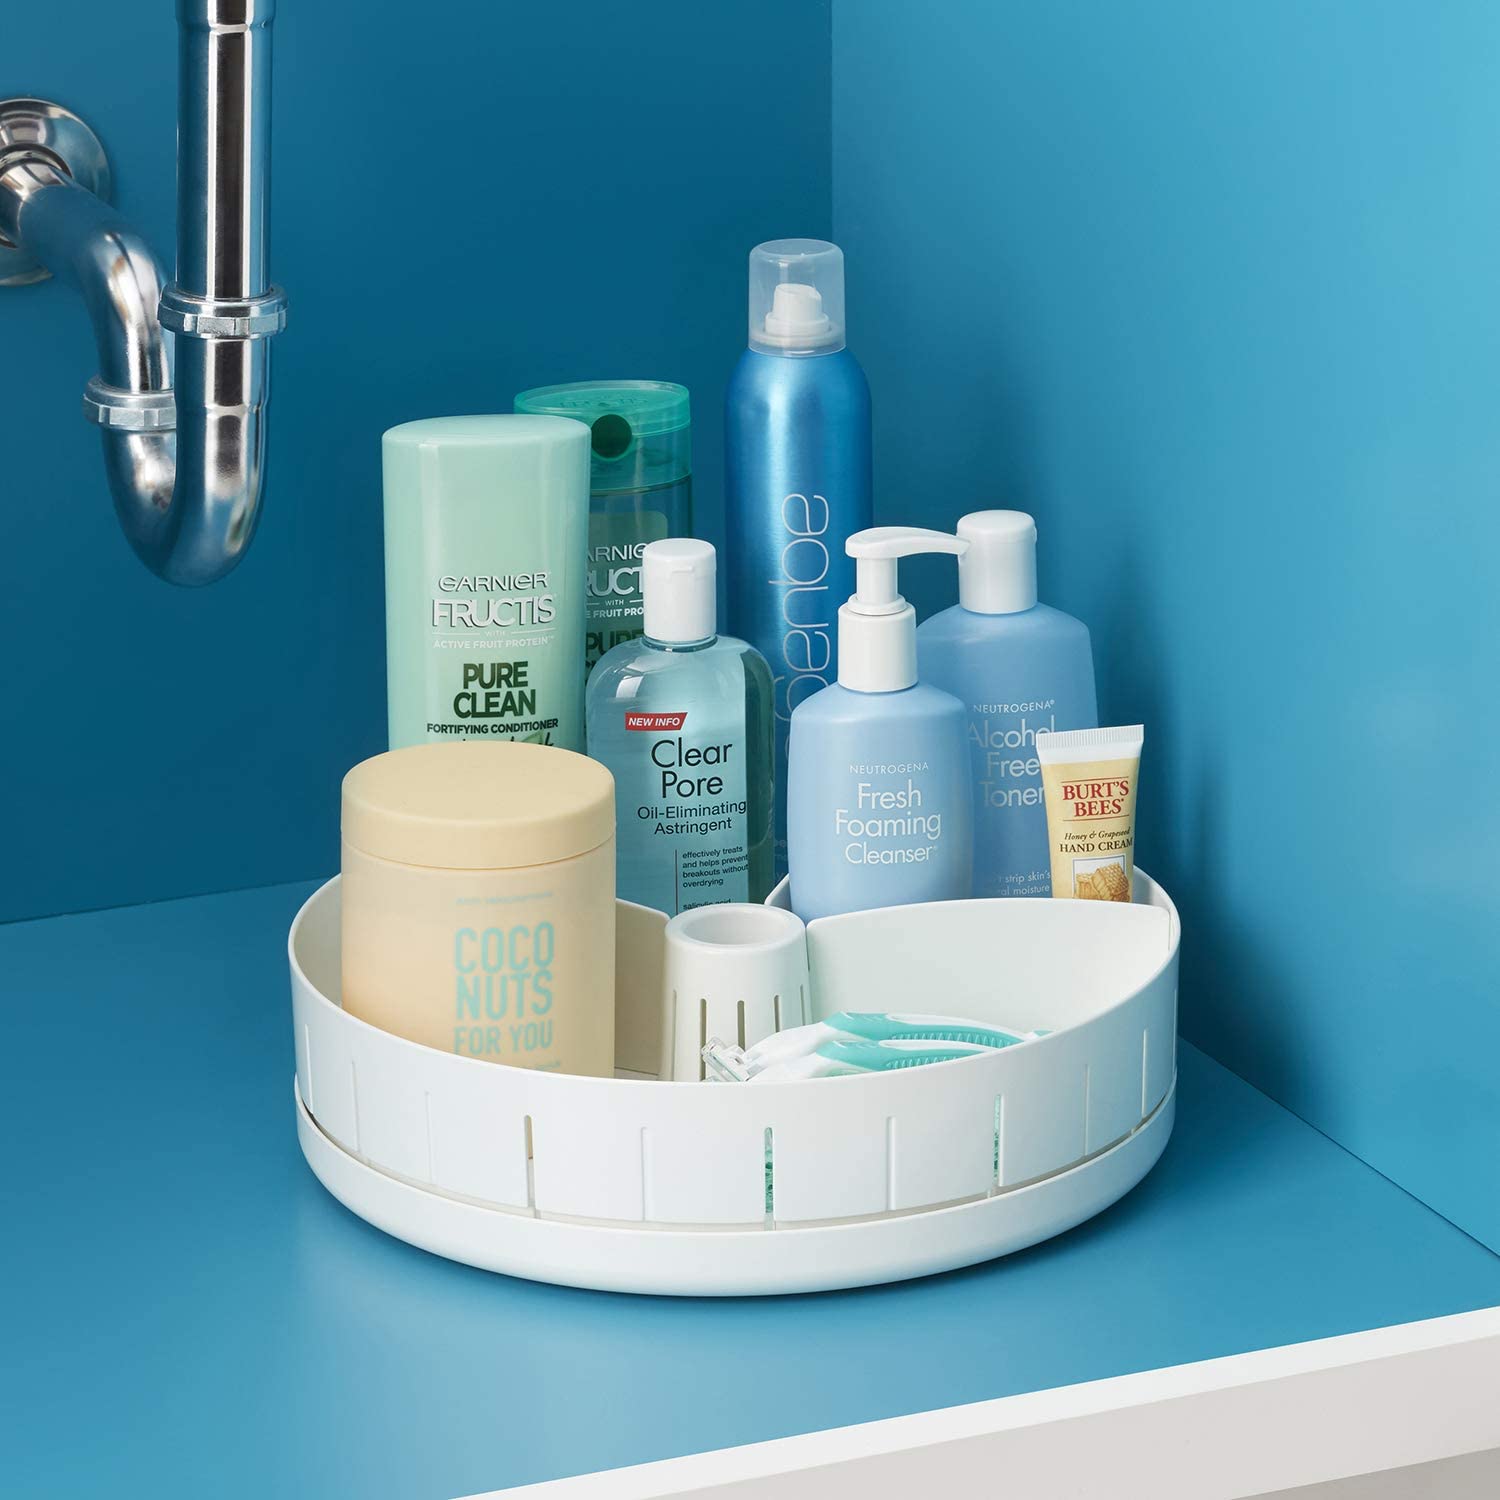 Best and Most Useful Under-the-Sink Organizers